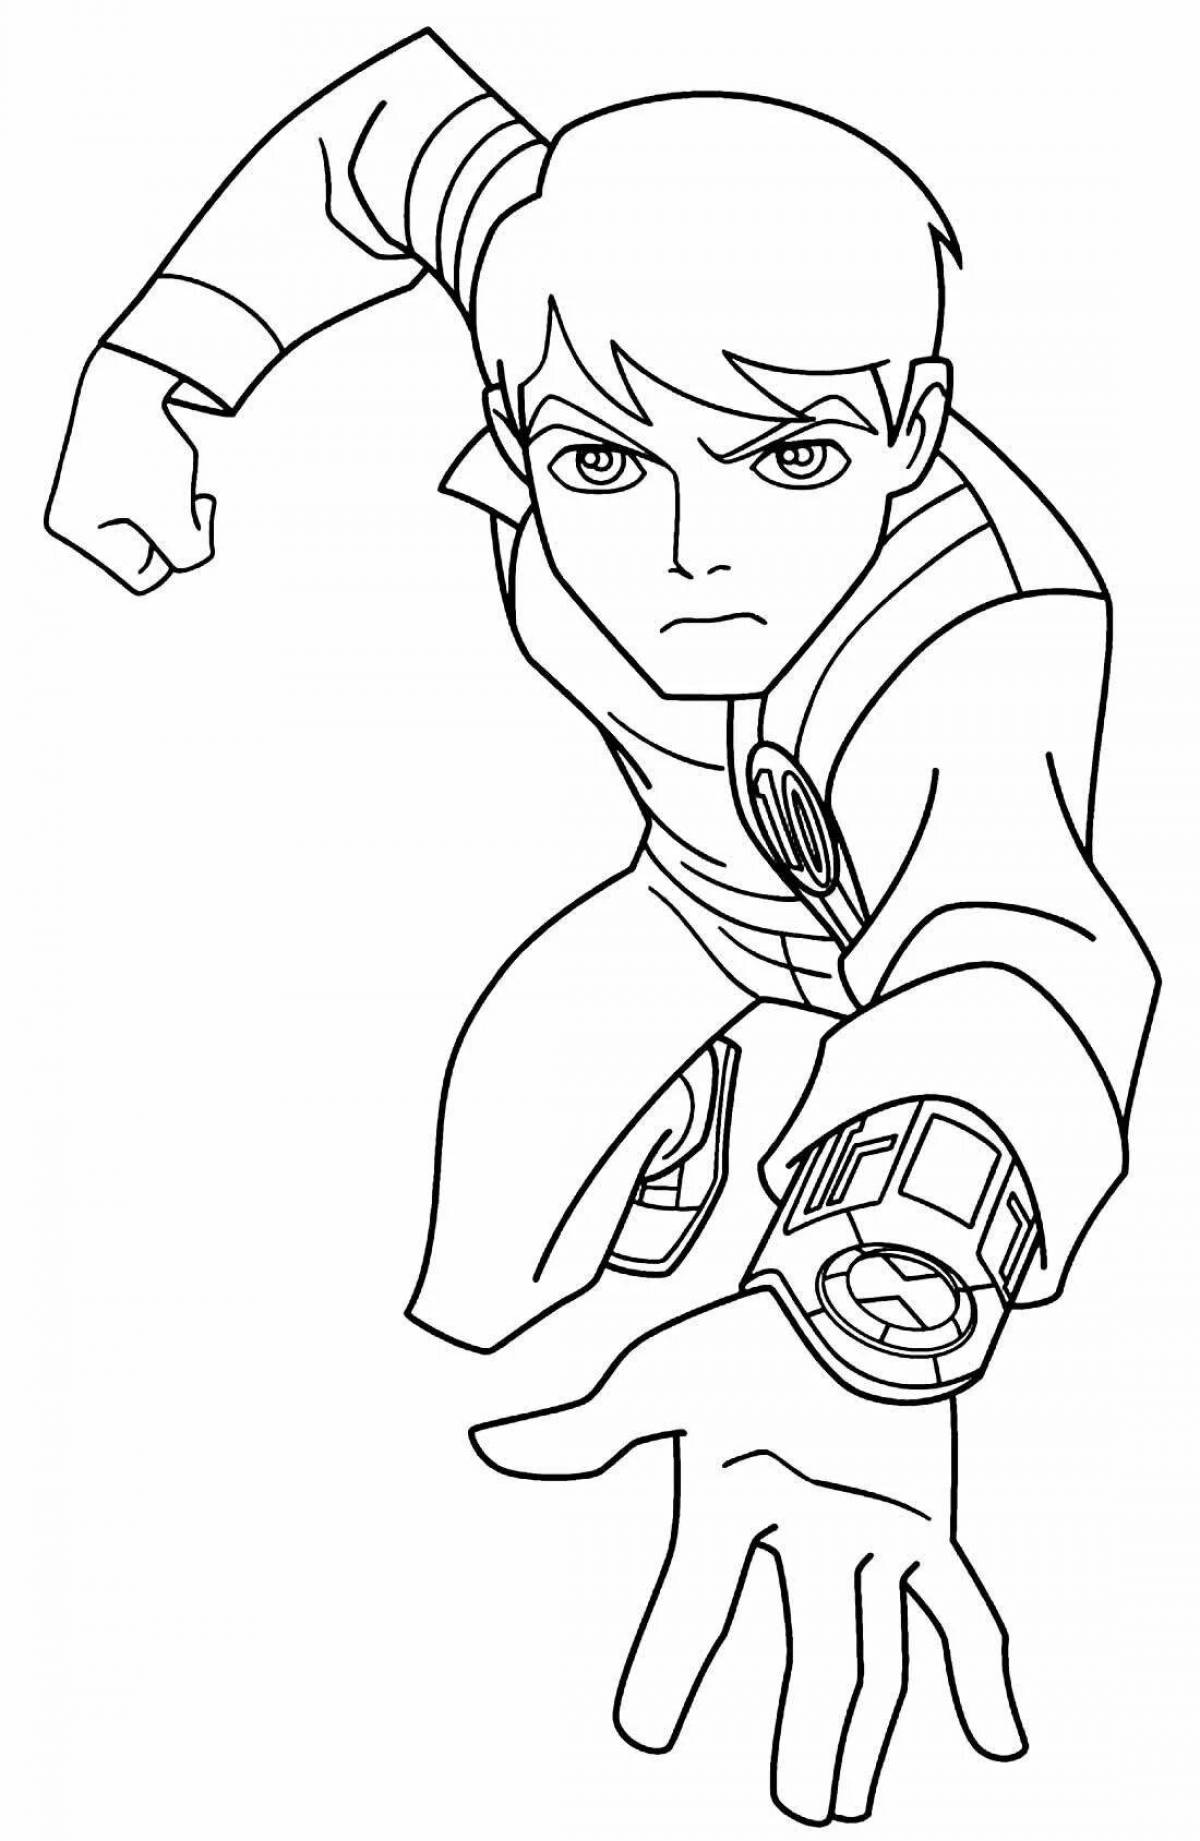 Amazing omnitrix coloring page